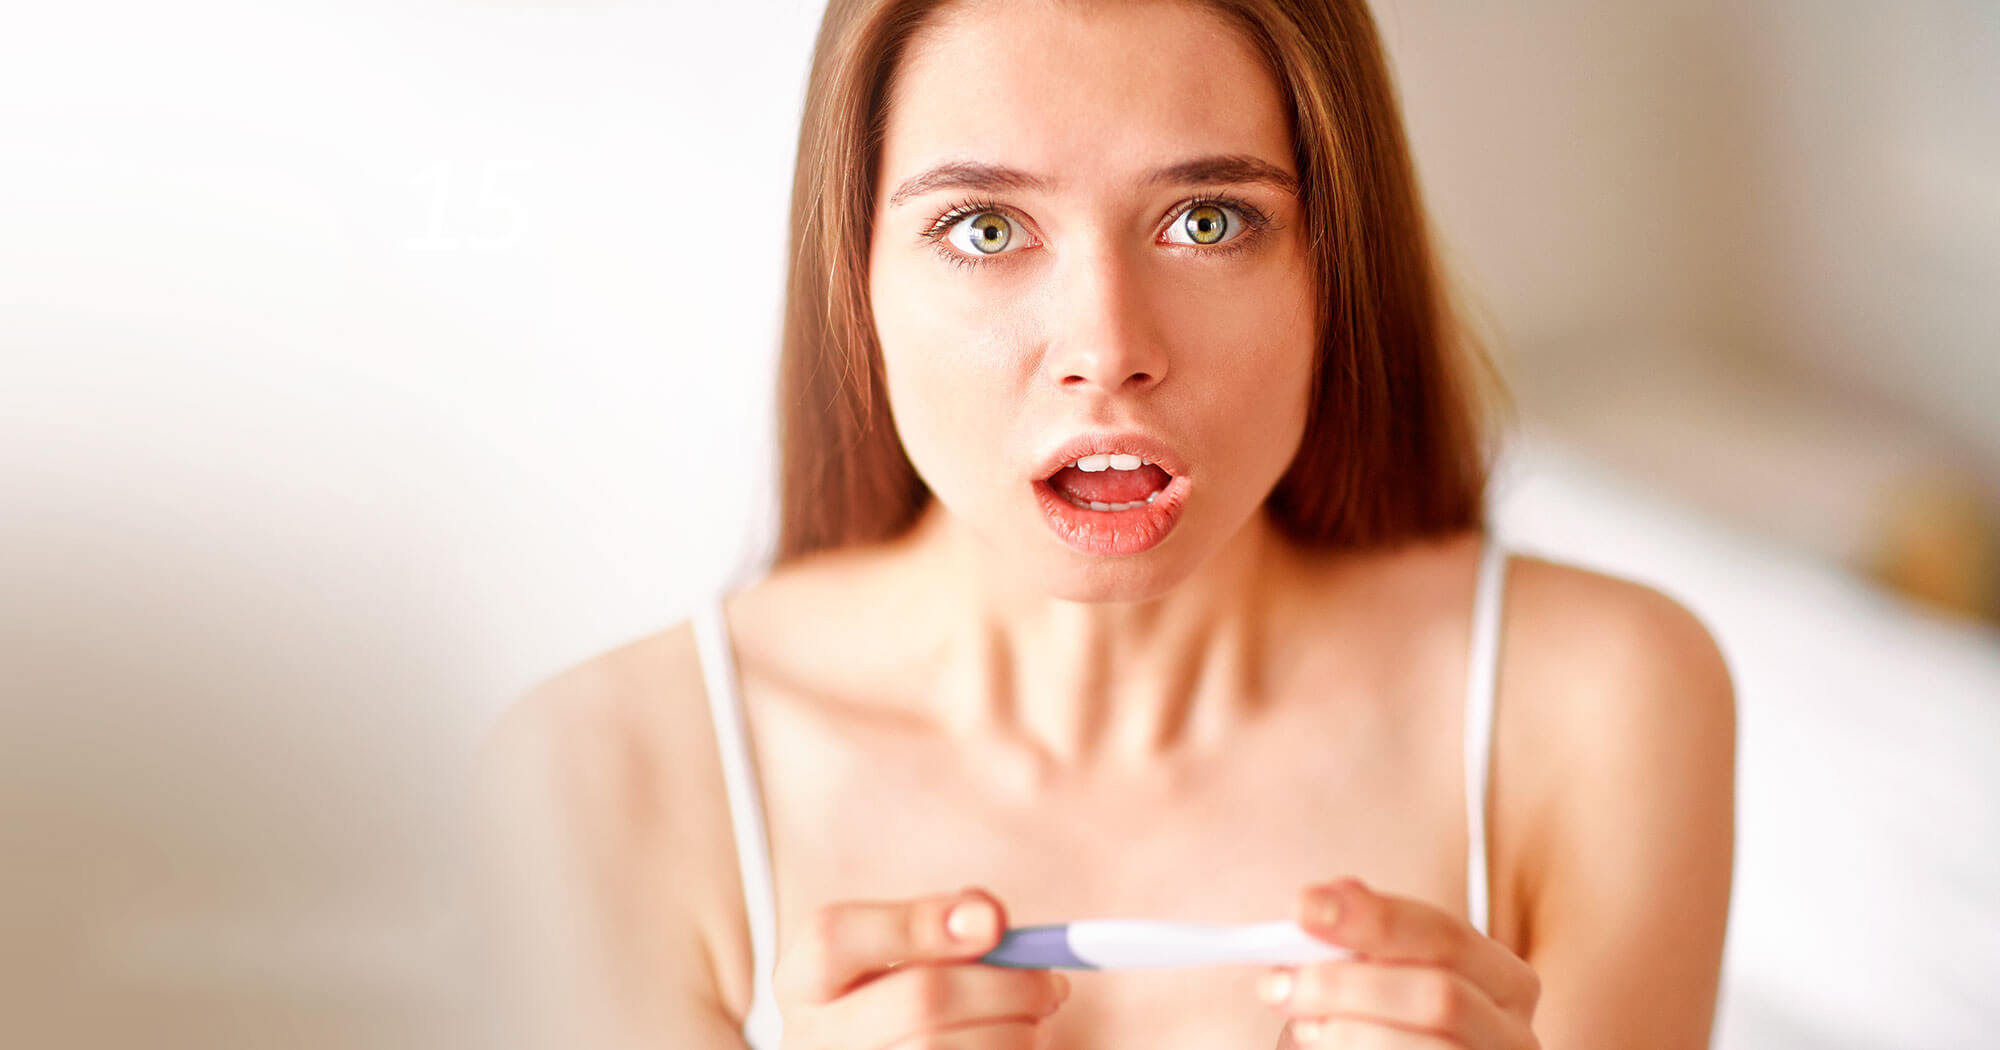 Could you be pregnant, but it's too early for a home pregnancy test? Here are the 15 earliest signs of pregnancy and pregnancy symptoms to look out for.